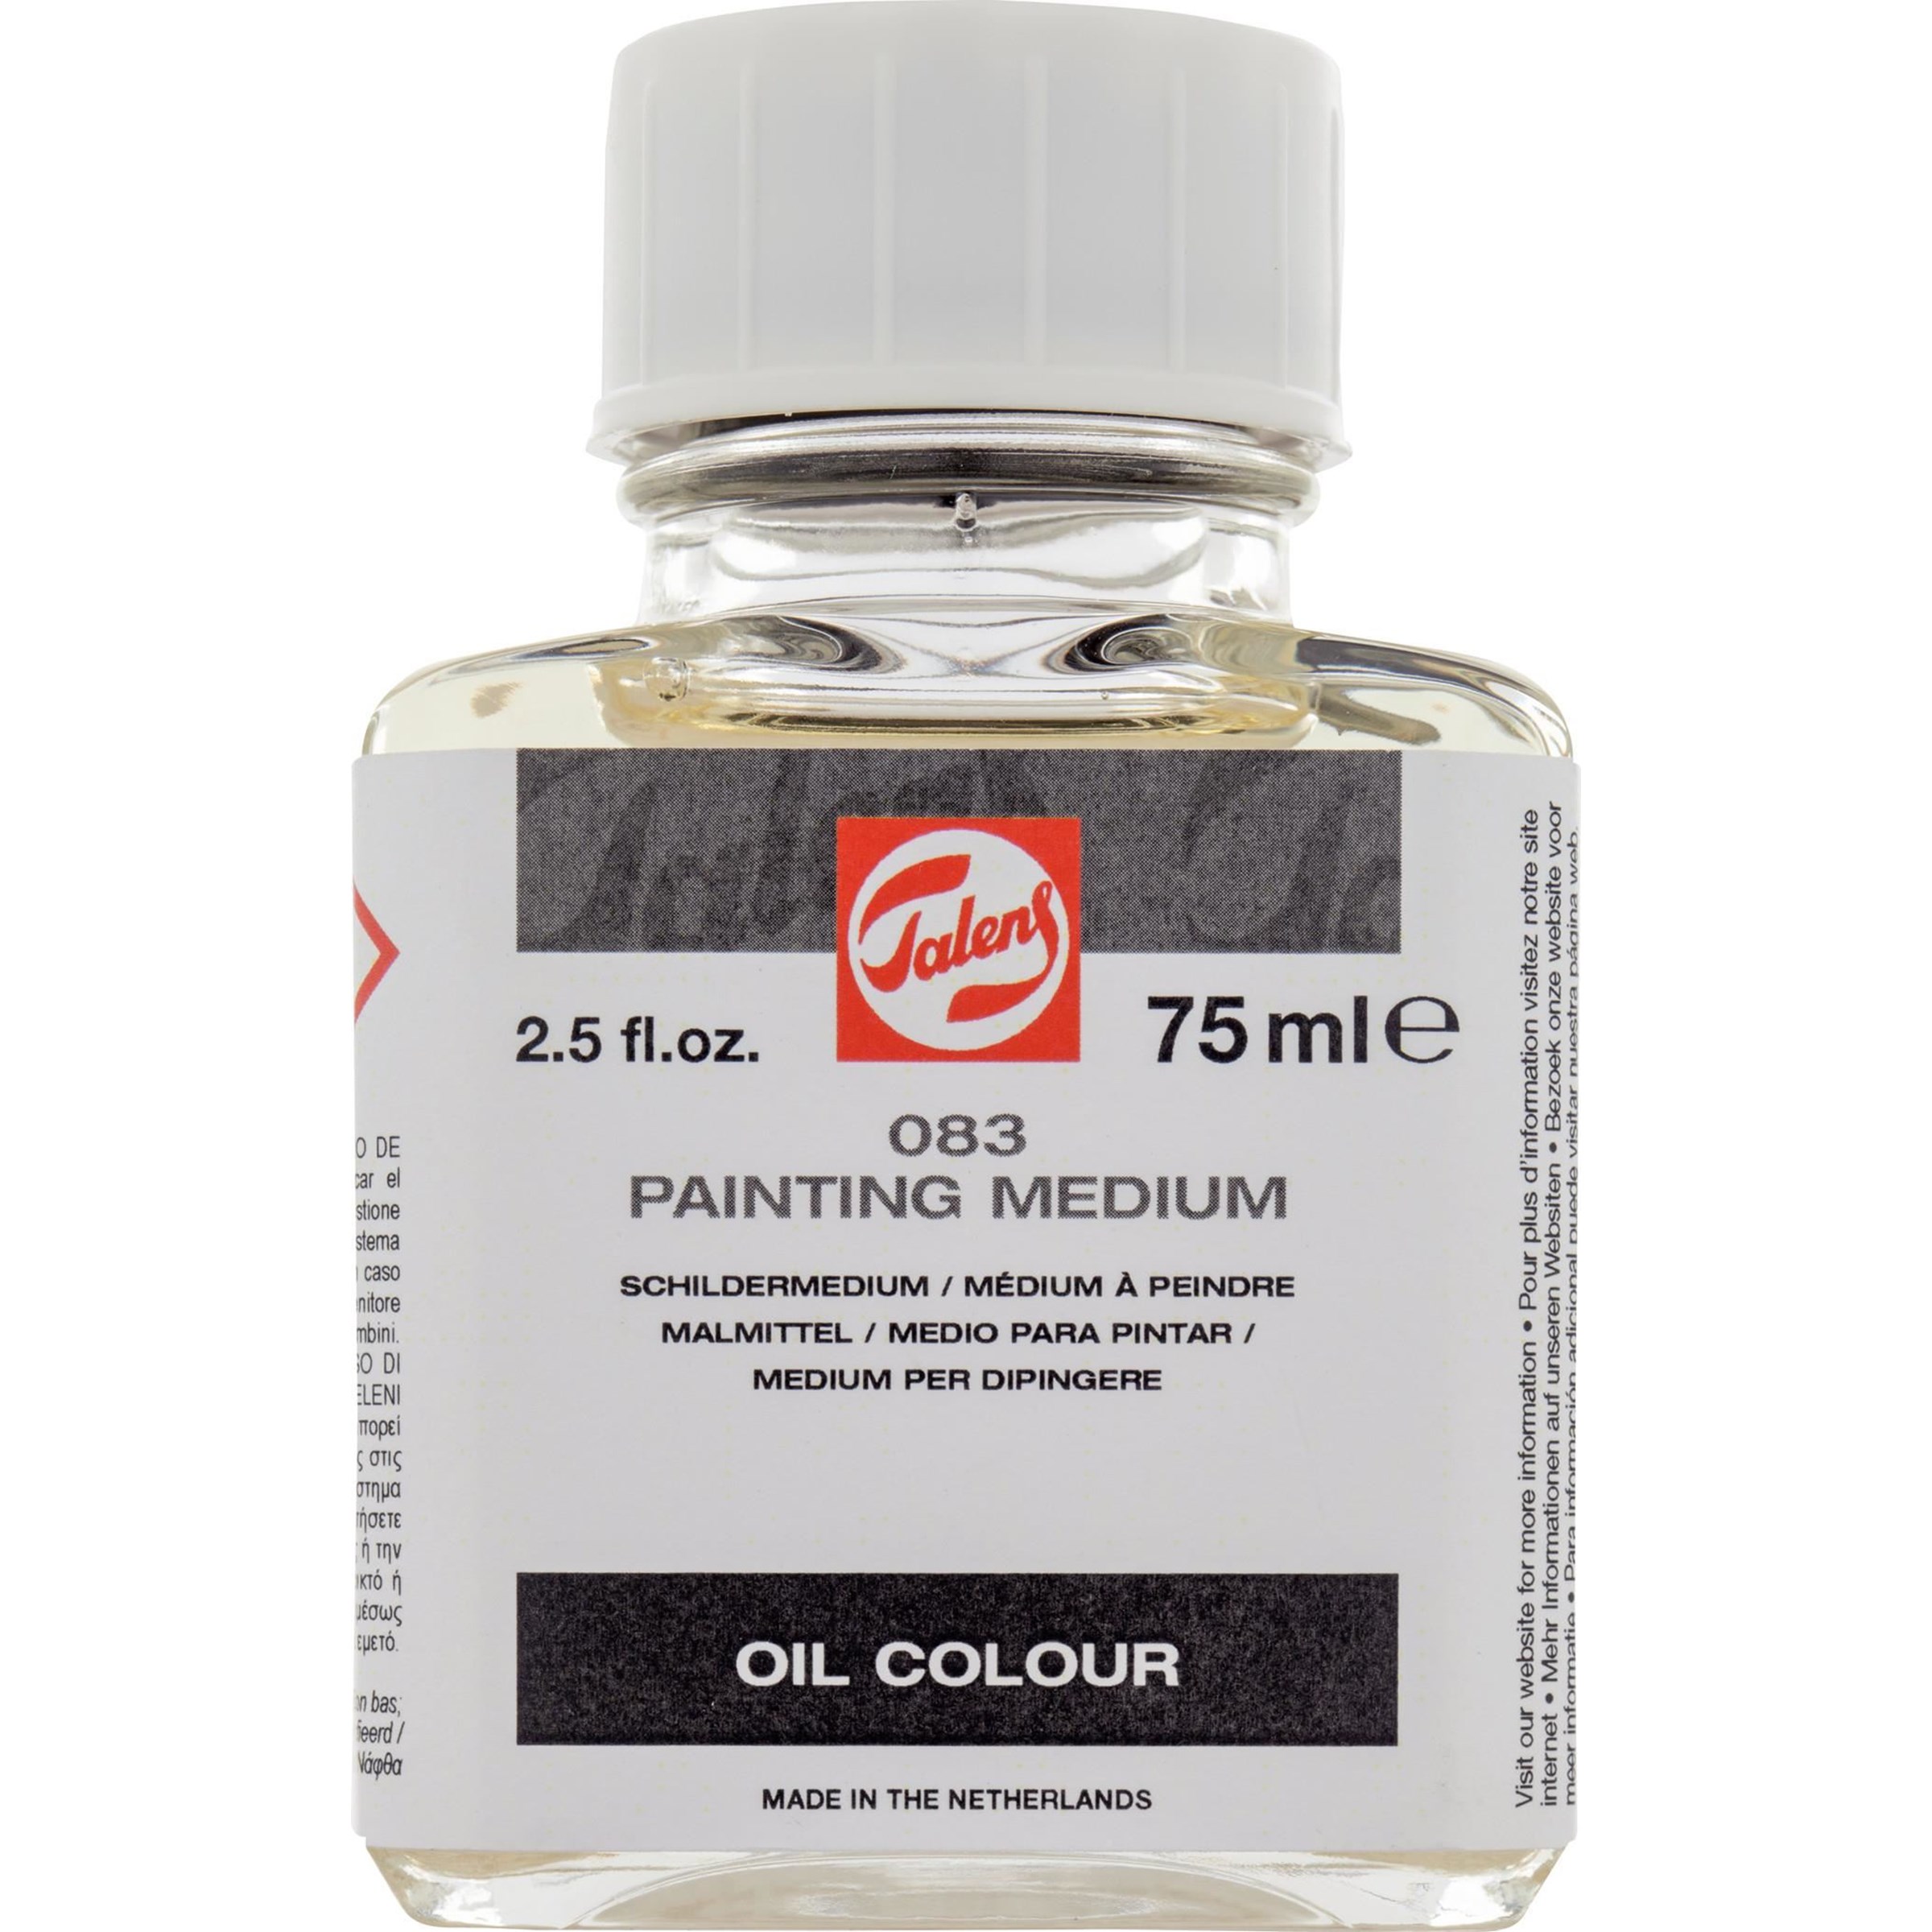 What you need to know about oil painting medium, Part I